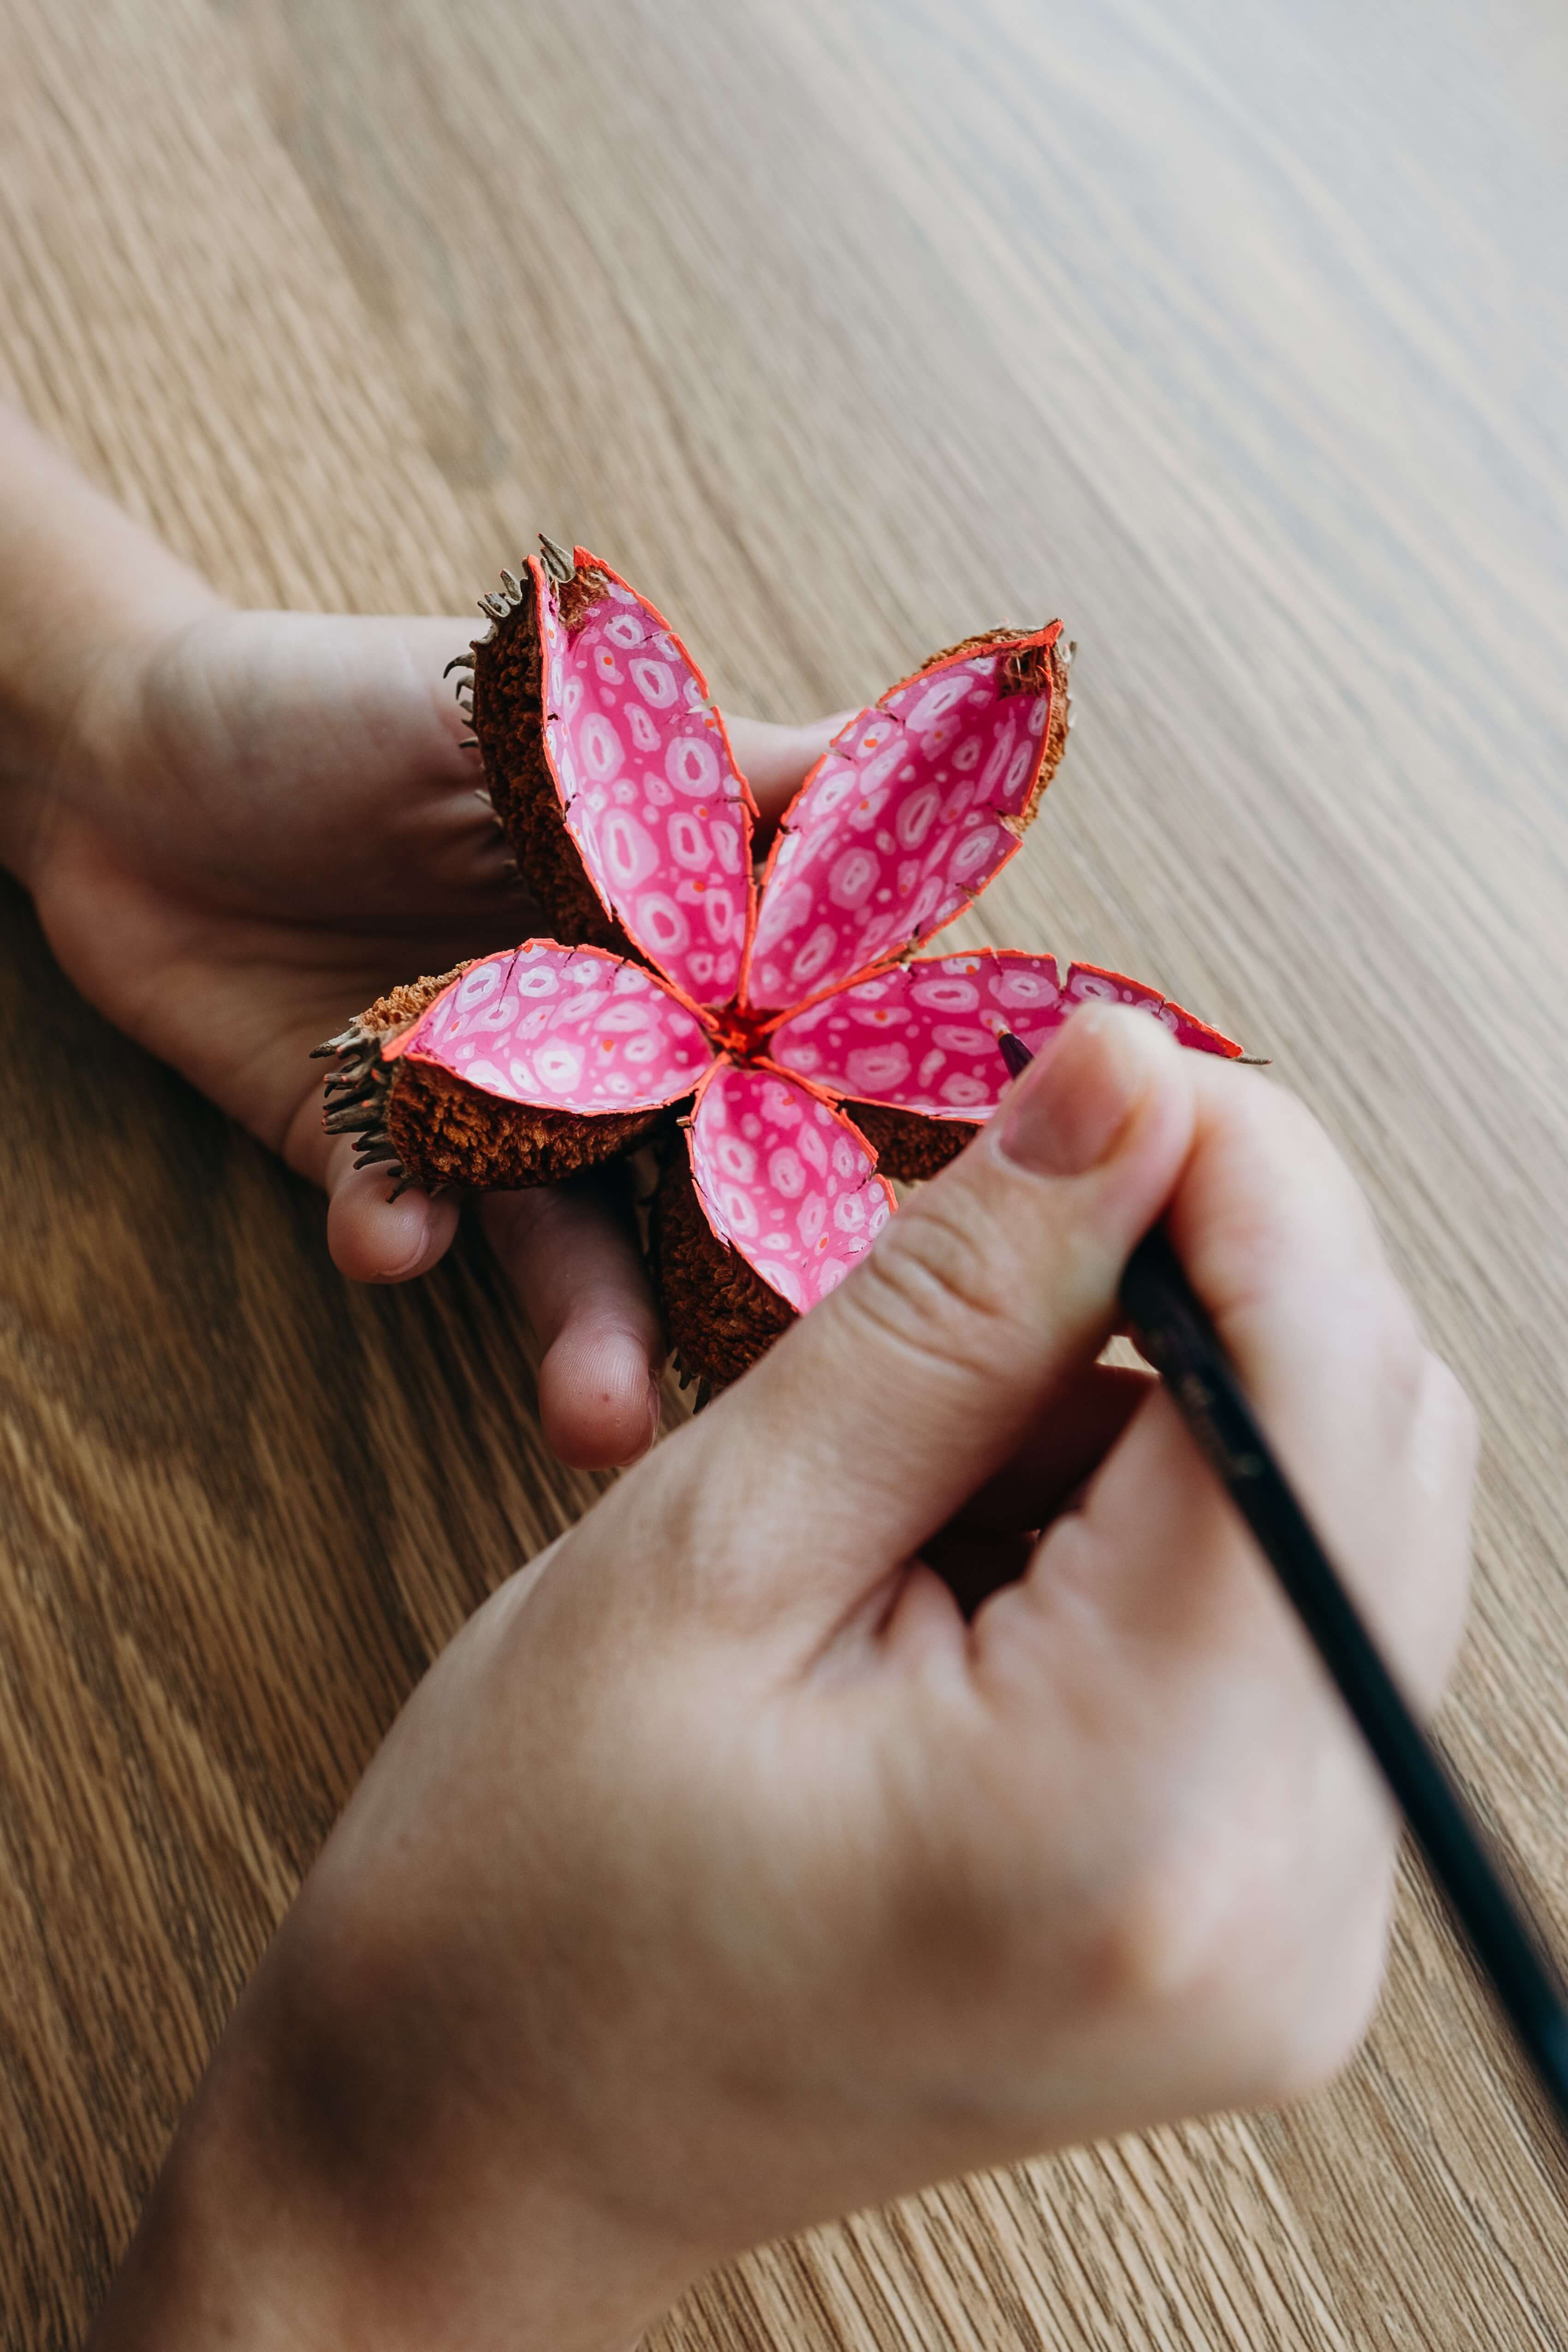 7. Hands intricately painting a leaf to look like a pink flower.